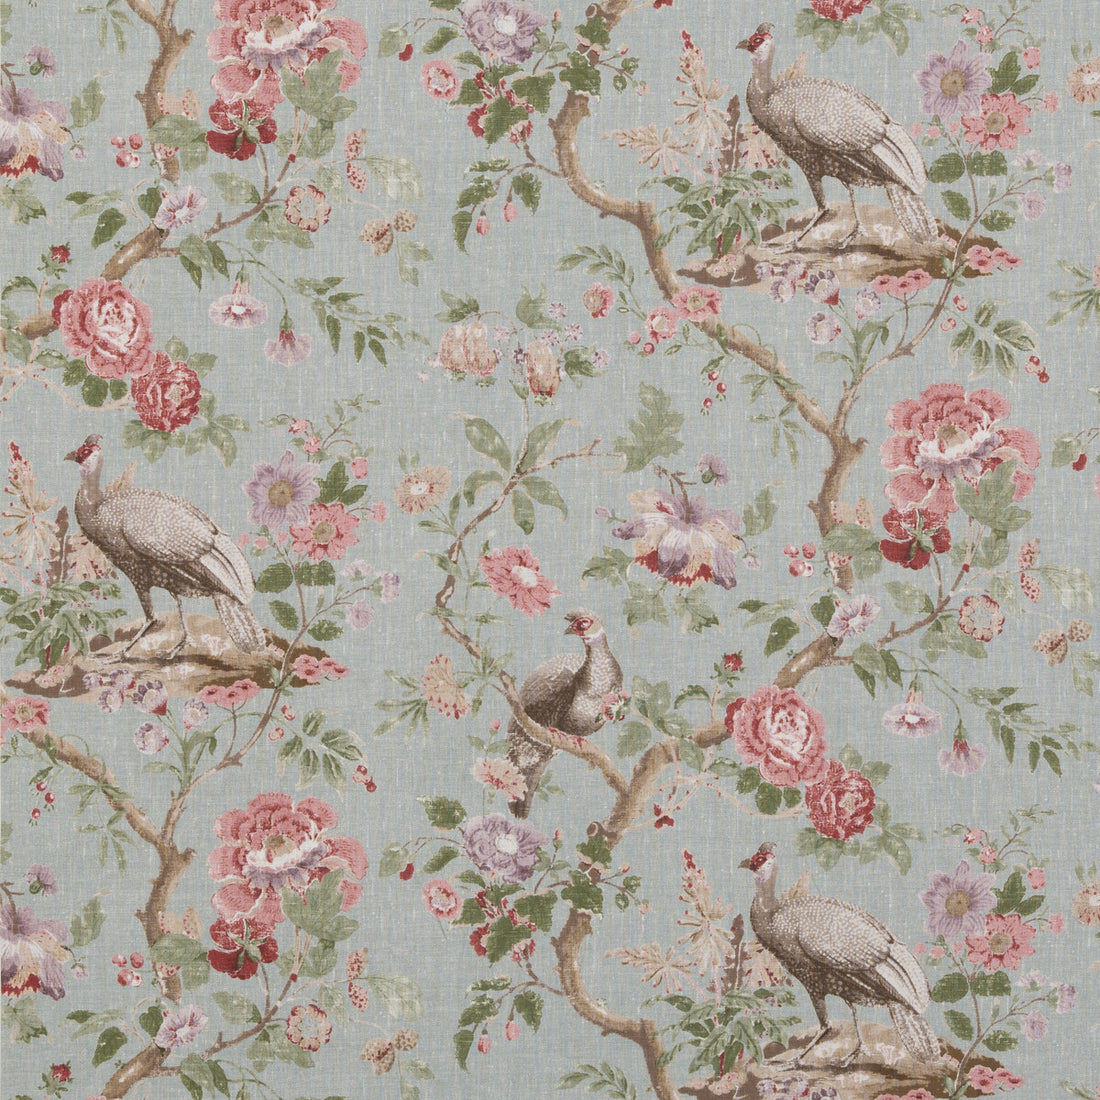 Broughton Rose fabric in aqua color - pattern BP10949.4.0 - by G P &amp; J Baker in the Ashmore collection